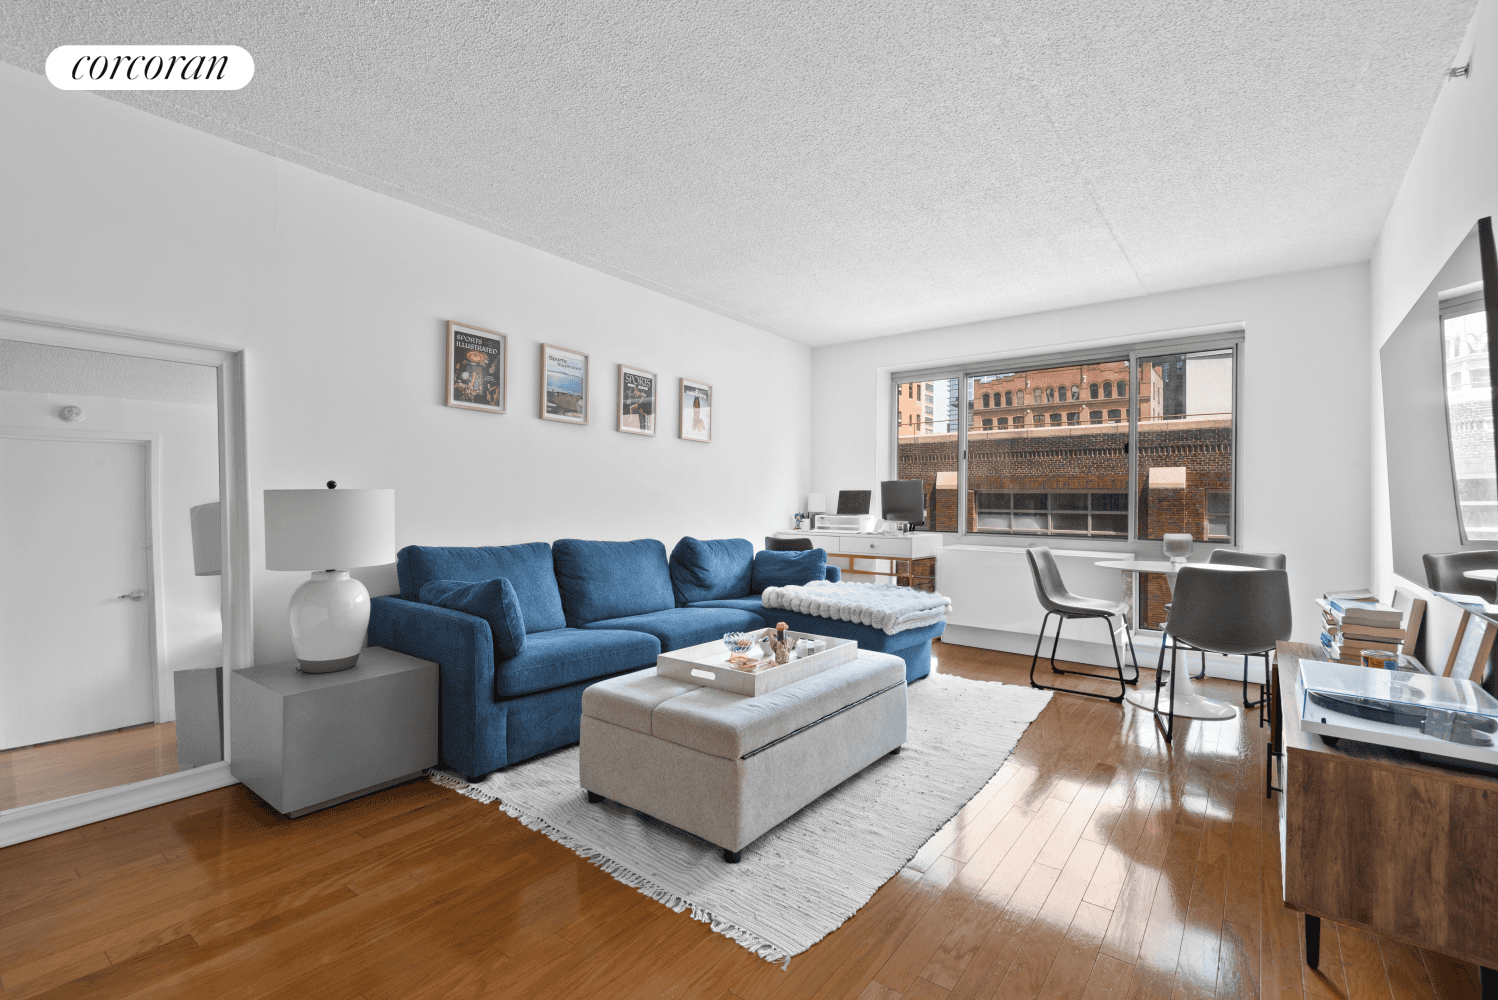 Bright, spacious one bedroom 670 SF home in trendy West Chelsea available for purchase.